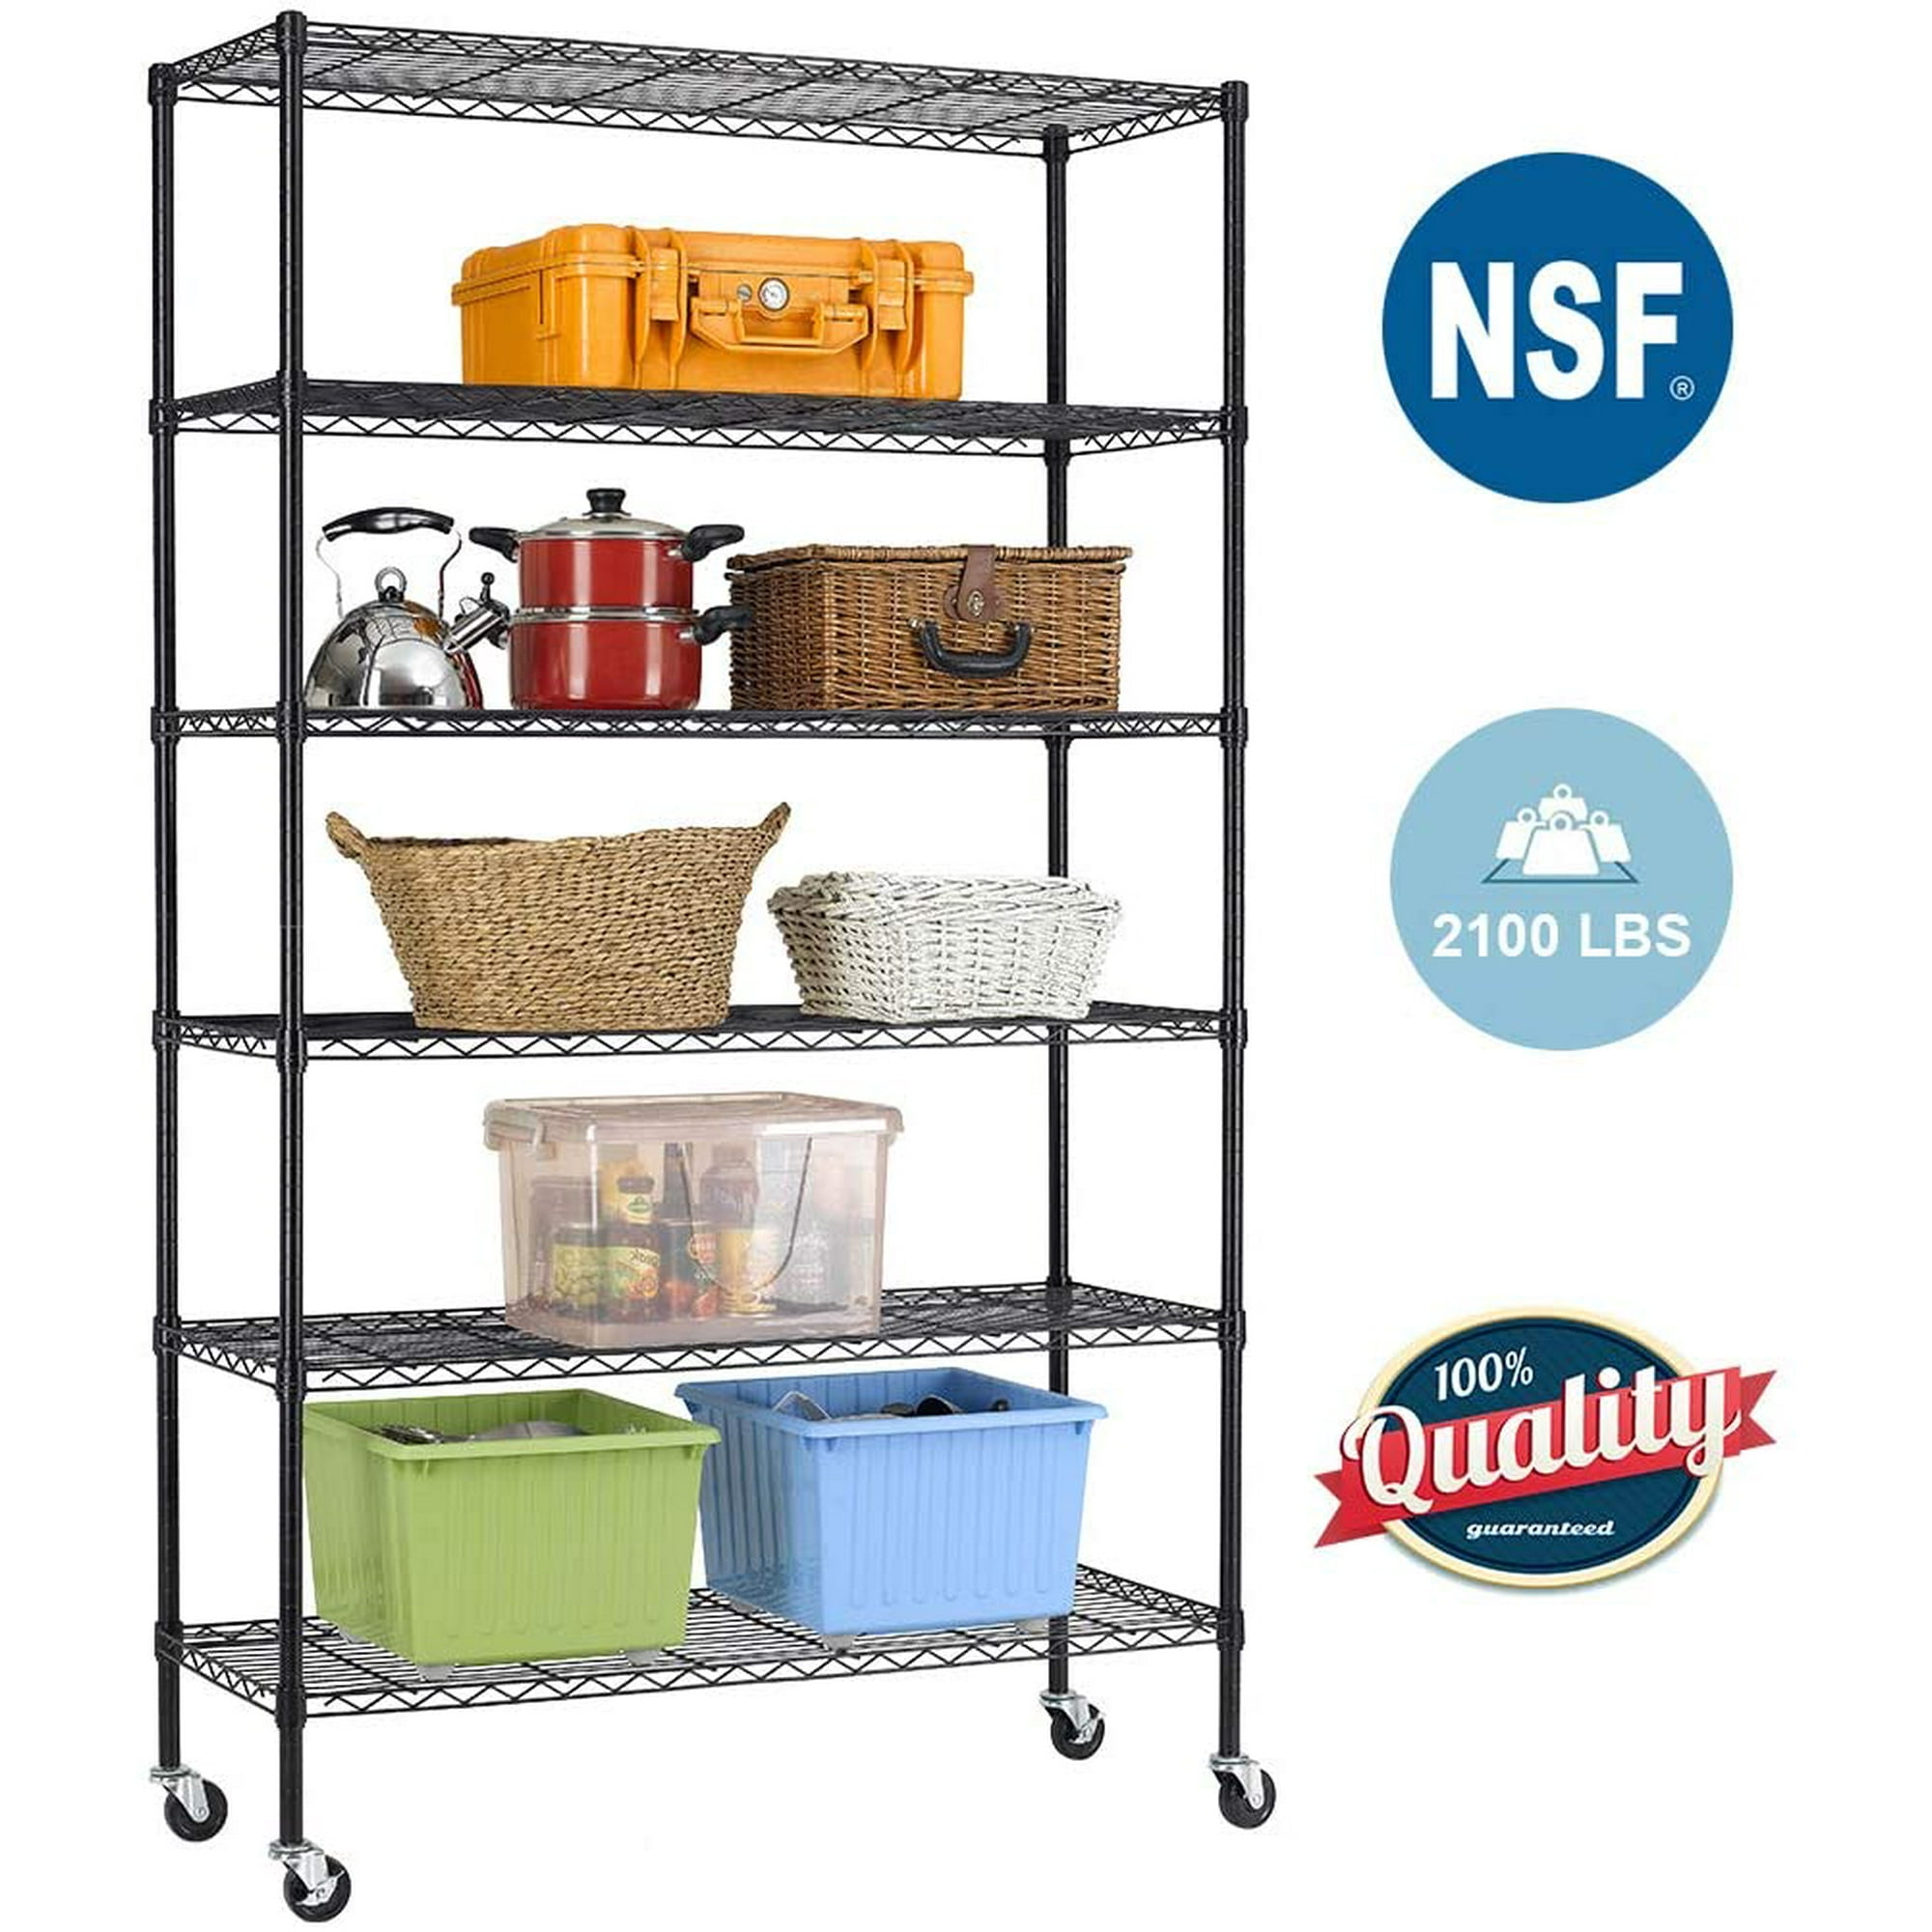 6 Tier Wire Shelving Unit Heavy Duty, Metal Shelving Unit With Wheels